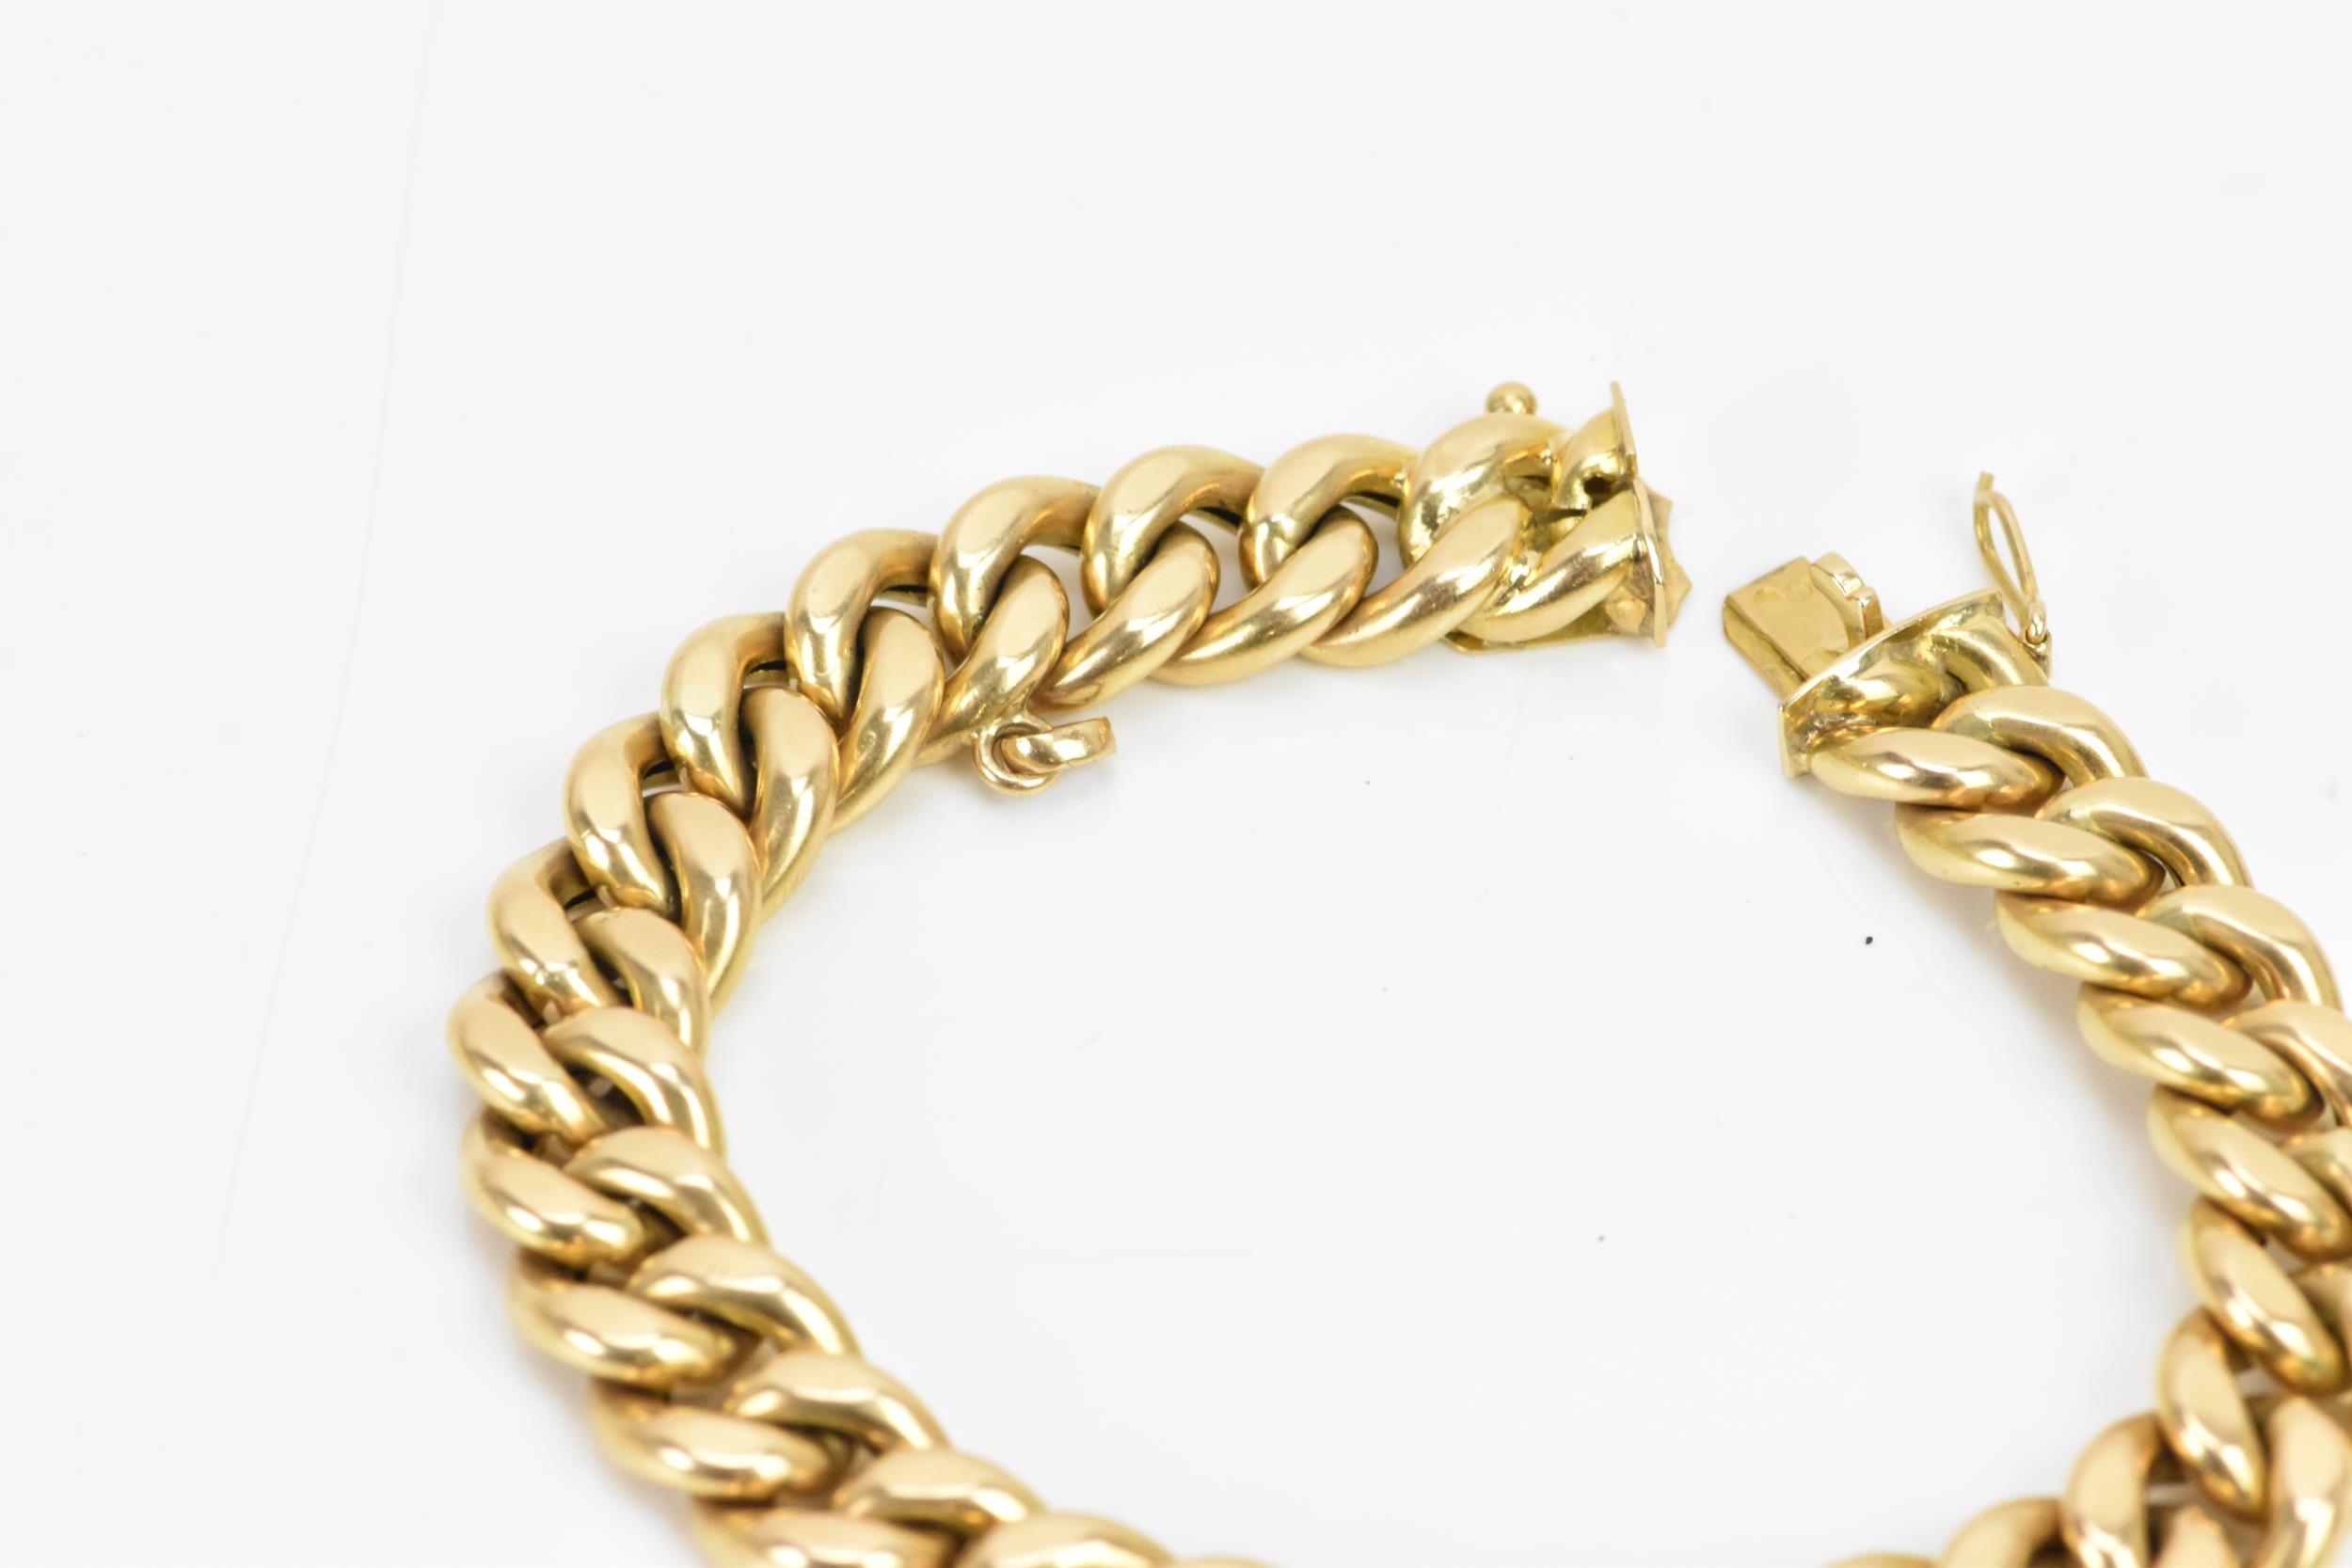 A Yelloe gold curb chain link bracelet, tested as 14ct, with an open box clasp, 19cm, 22.4 grams - Image 4 of 6